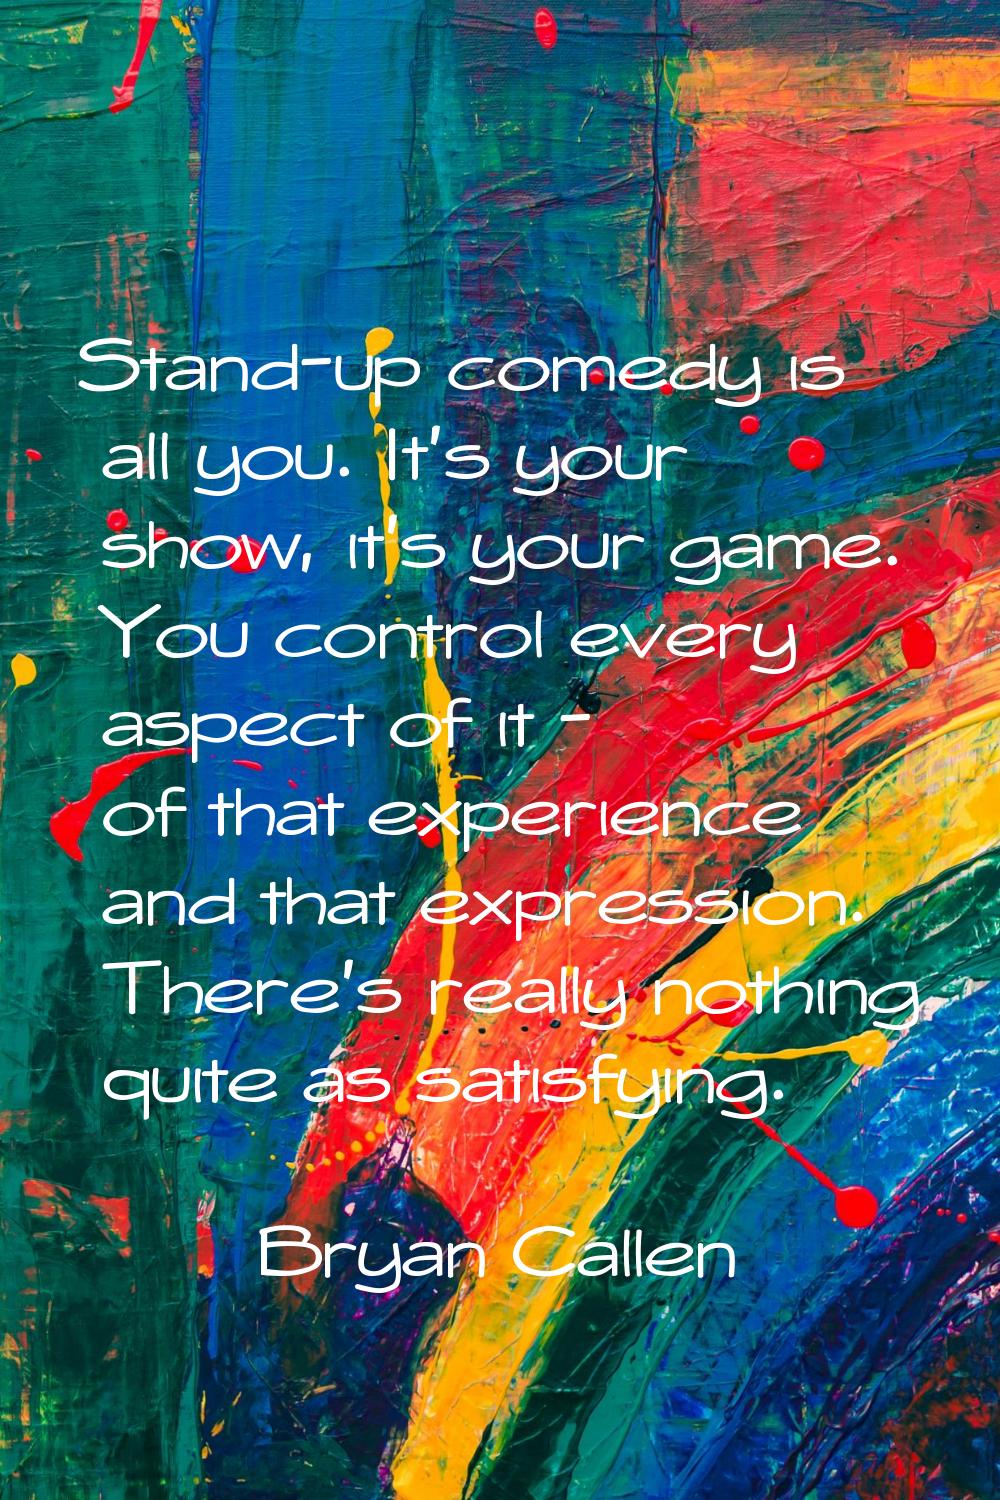 Stand-up comedy is all you. It's your show, it's your game. You control every aspect of it - of tha